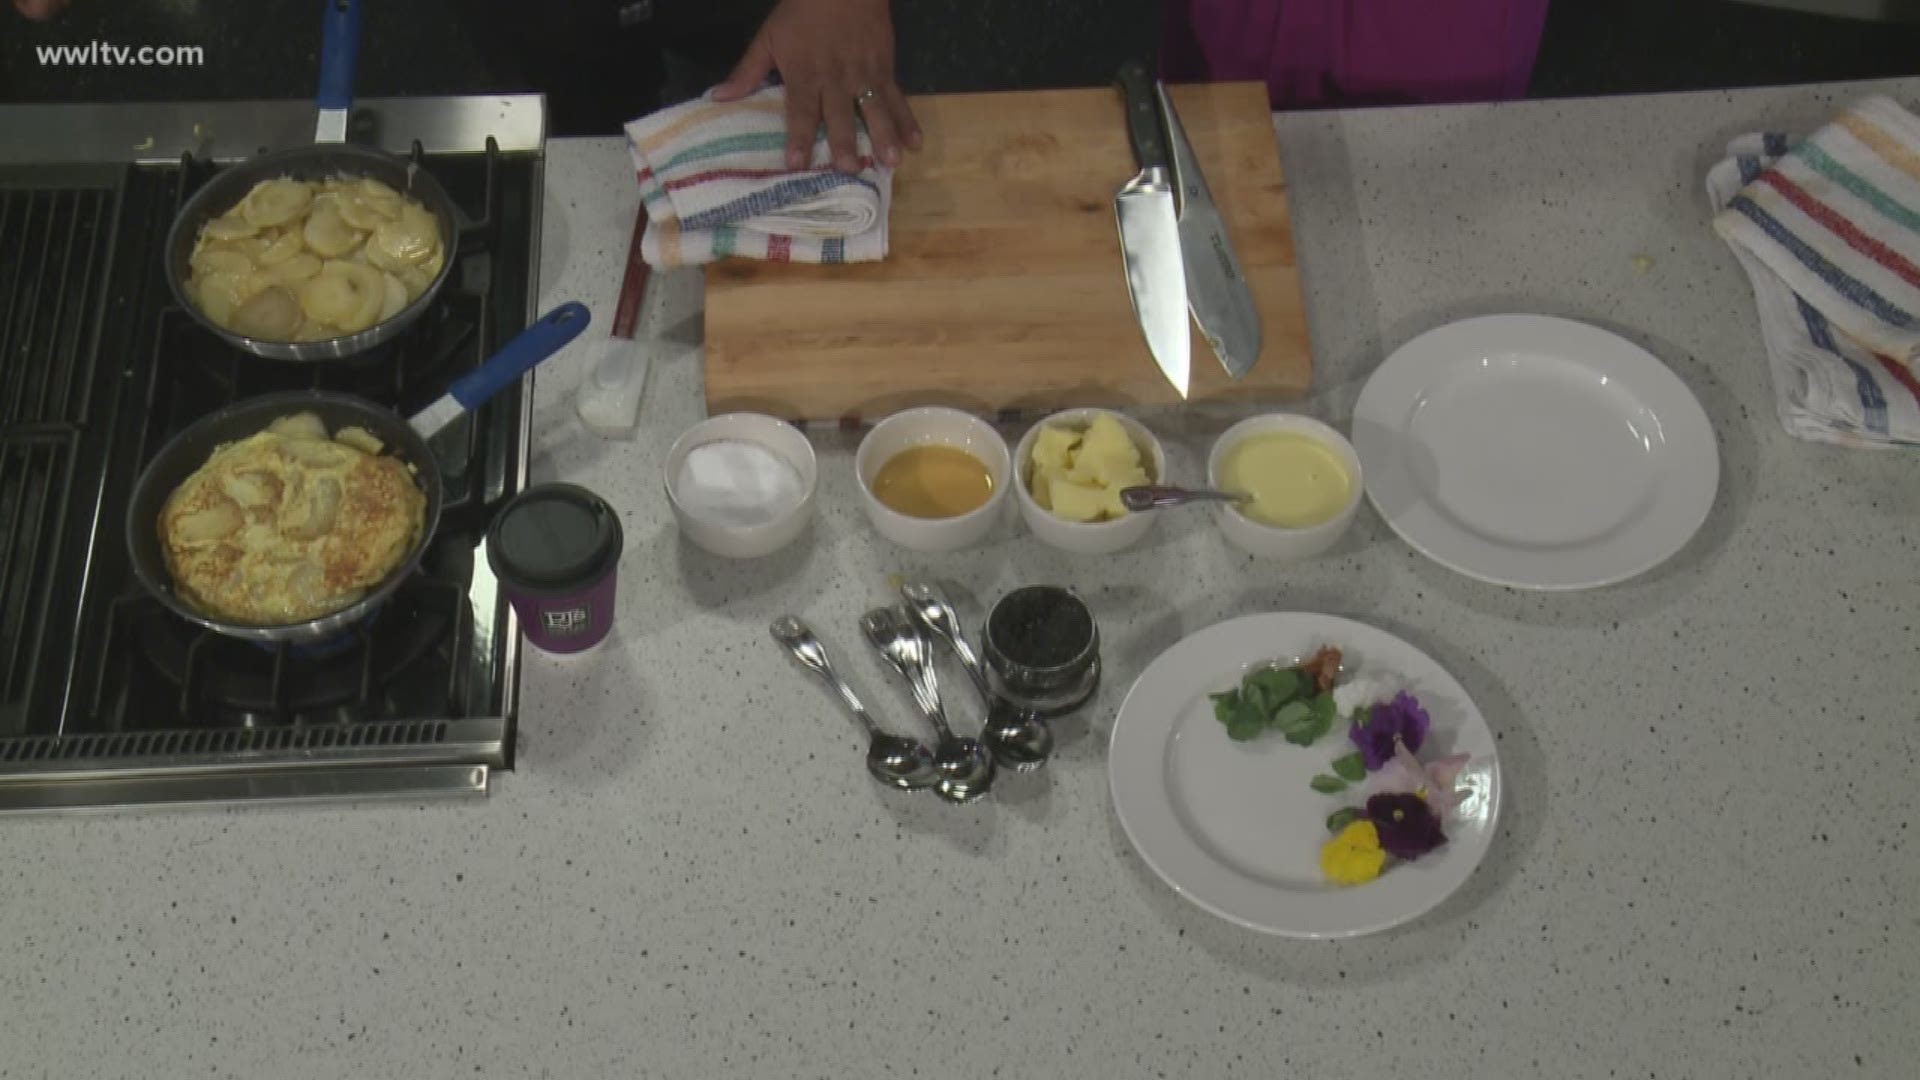 Iron Chef, Chef Jose Garces, is in the kitchen talking about his recent partnership and showing off some good food.